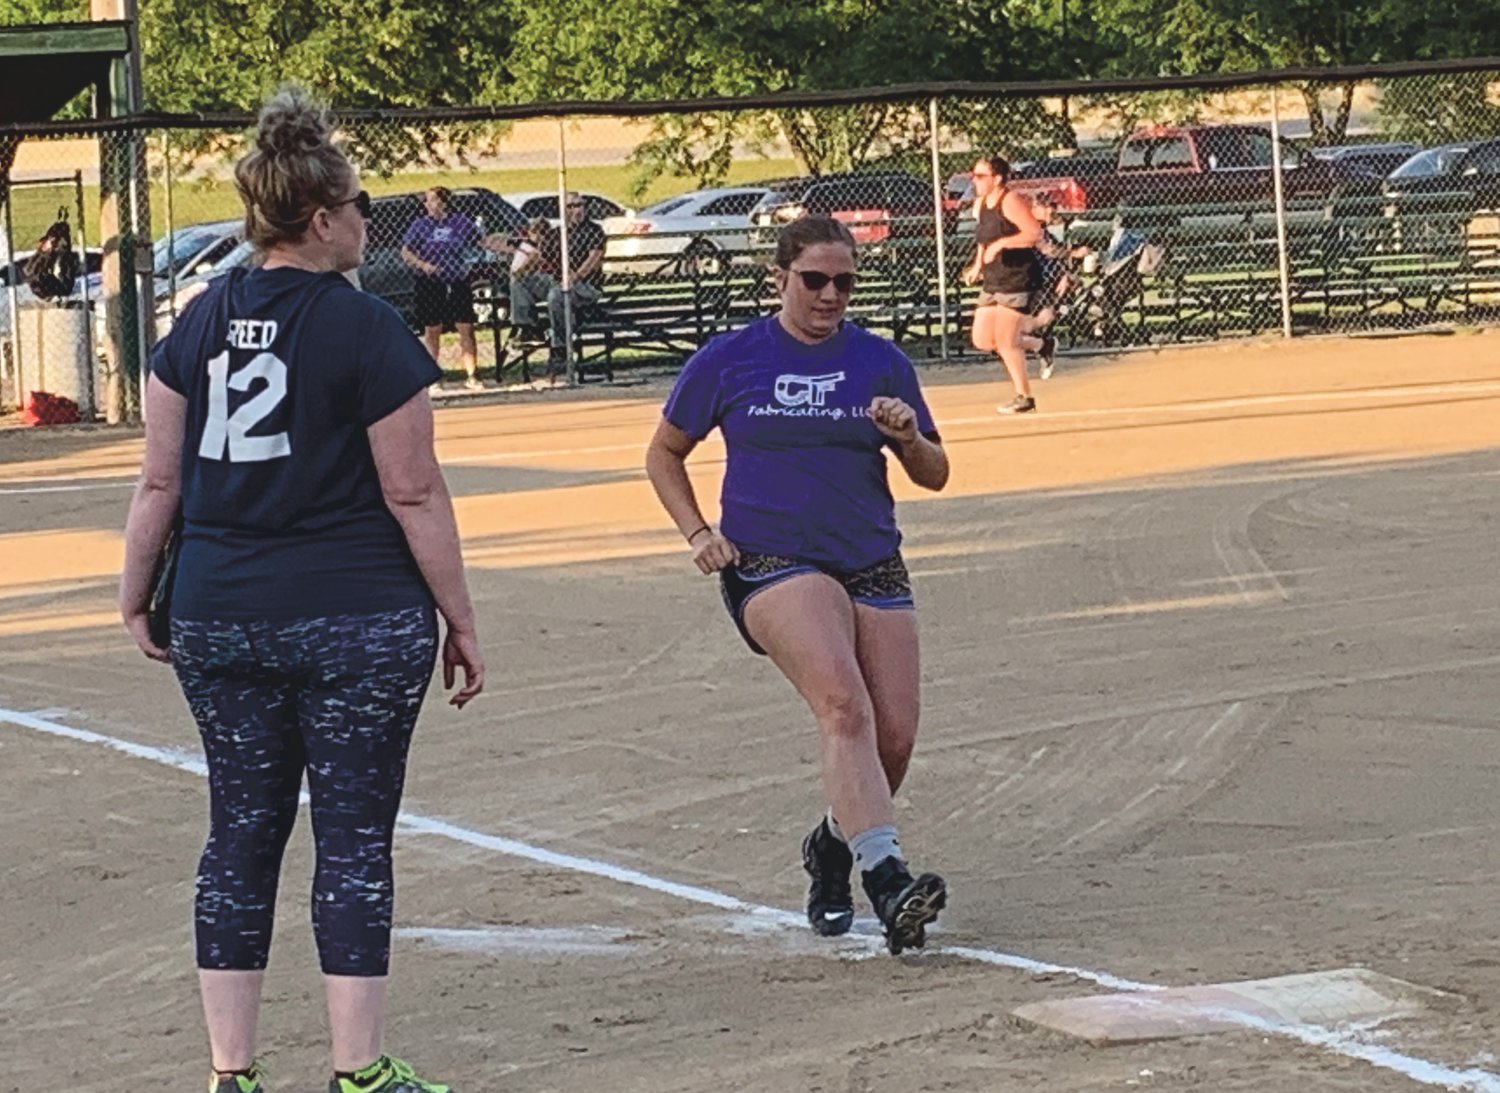 Sam Pigg heads to first base for C&F Fabricating early in the championship game of the Women's City Tournament under the watchful eyes of first base coach and pitcher Leah Reed. C&F defeated Gould/Stephenson/C&F to win the title, which came after they won the regular season championship.